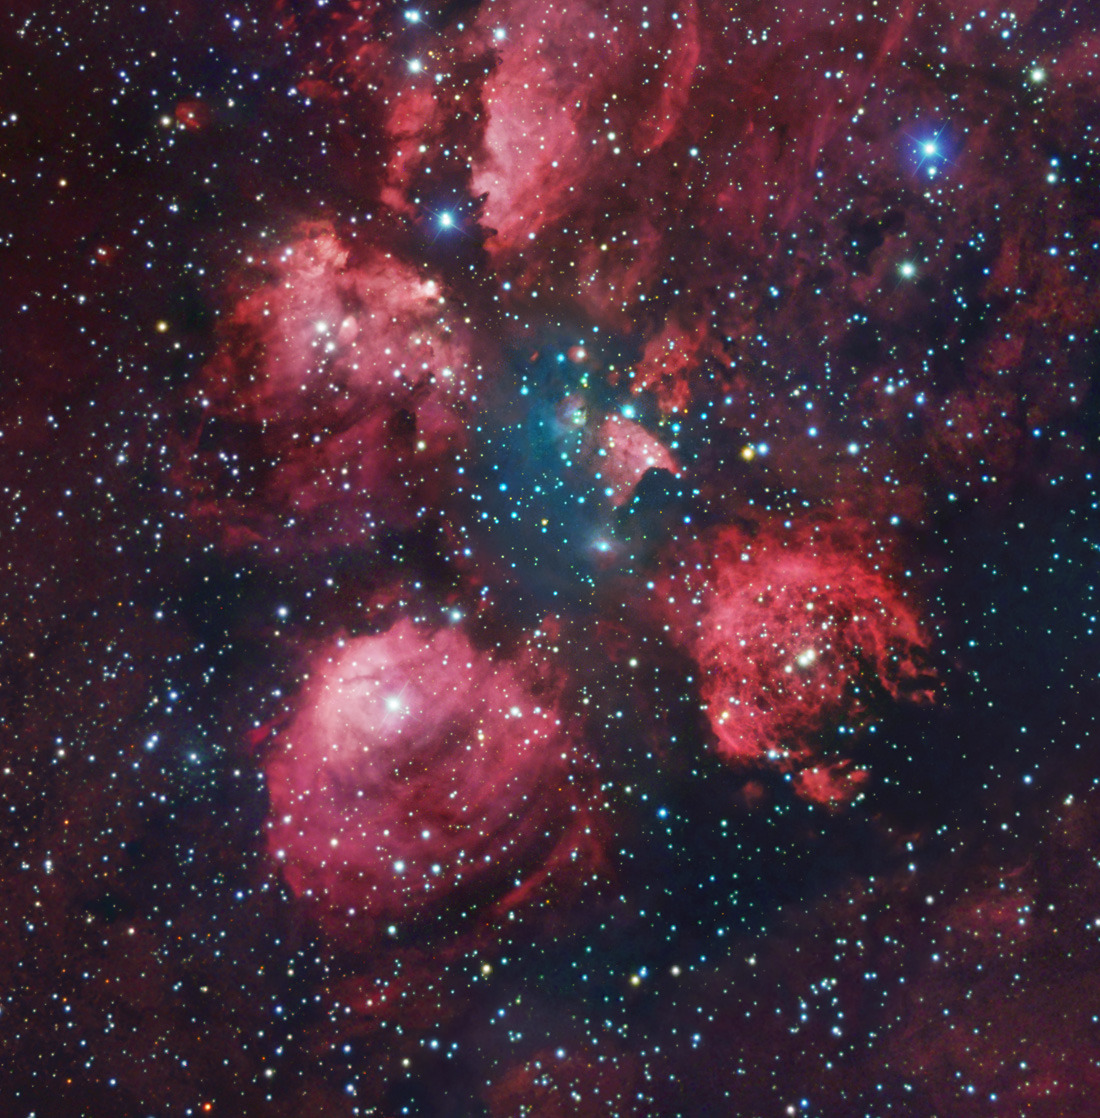 ikenbot:
“NGC 6334: Cat’s Paw
Image & Summary: Robert Gendler
Distance: 5,500 light years
Constellation: Scorpius
Located in the constellation of Scorpius, the Cat’s Paw Nebula resembles a faint, luminous paw-print on the sky. Deep images reveal that...